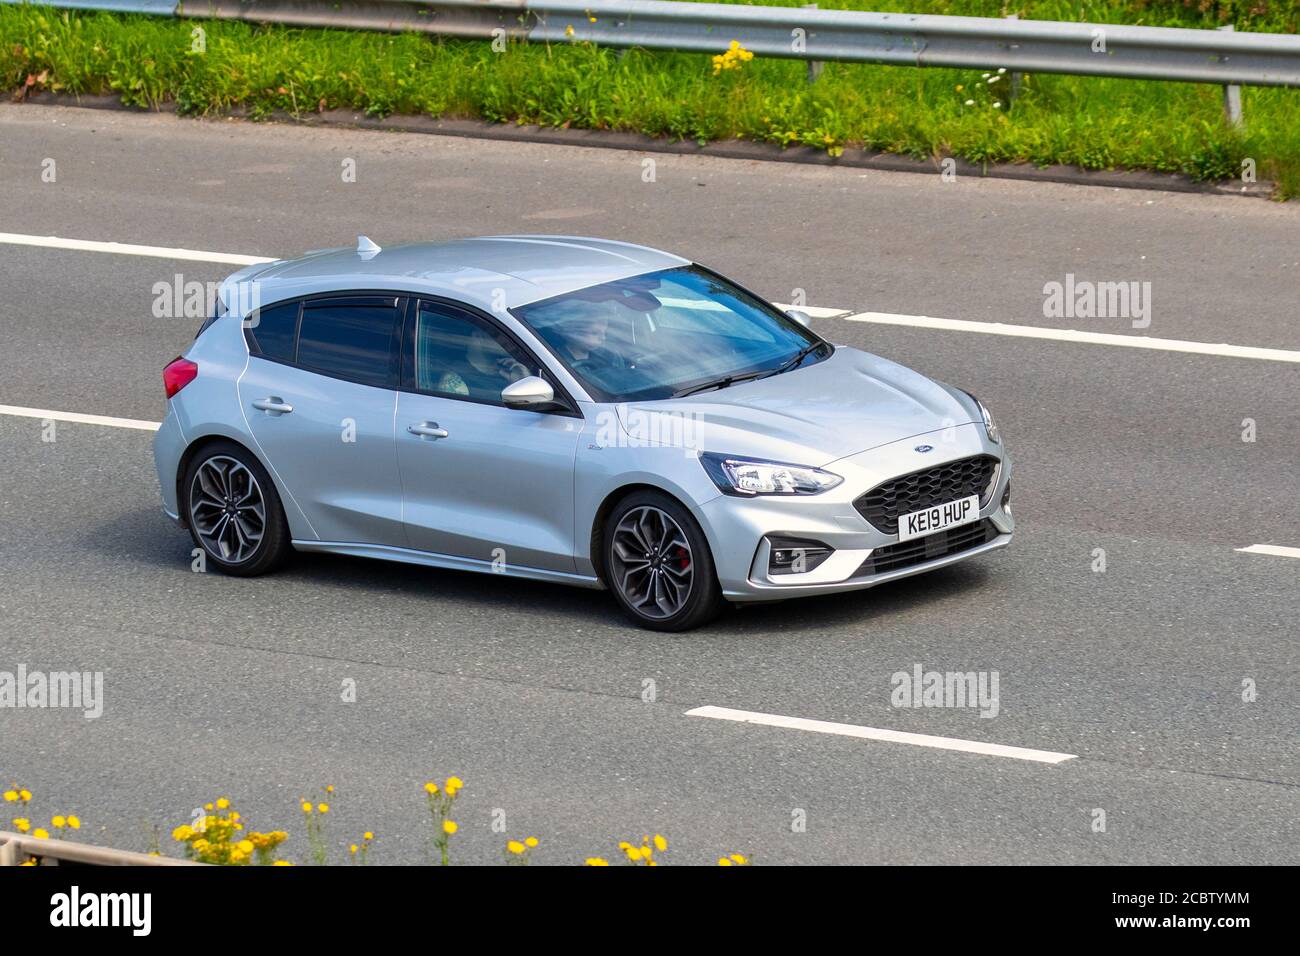 2019 silver Ford Focus St-Line X; Vehicular traffic moving vehicles, cars driving vehicle on UK roads, motors, motoring on the M6 motorway highway network. Stock Photo